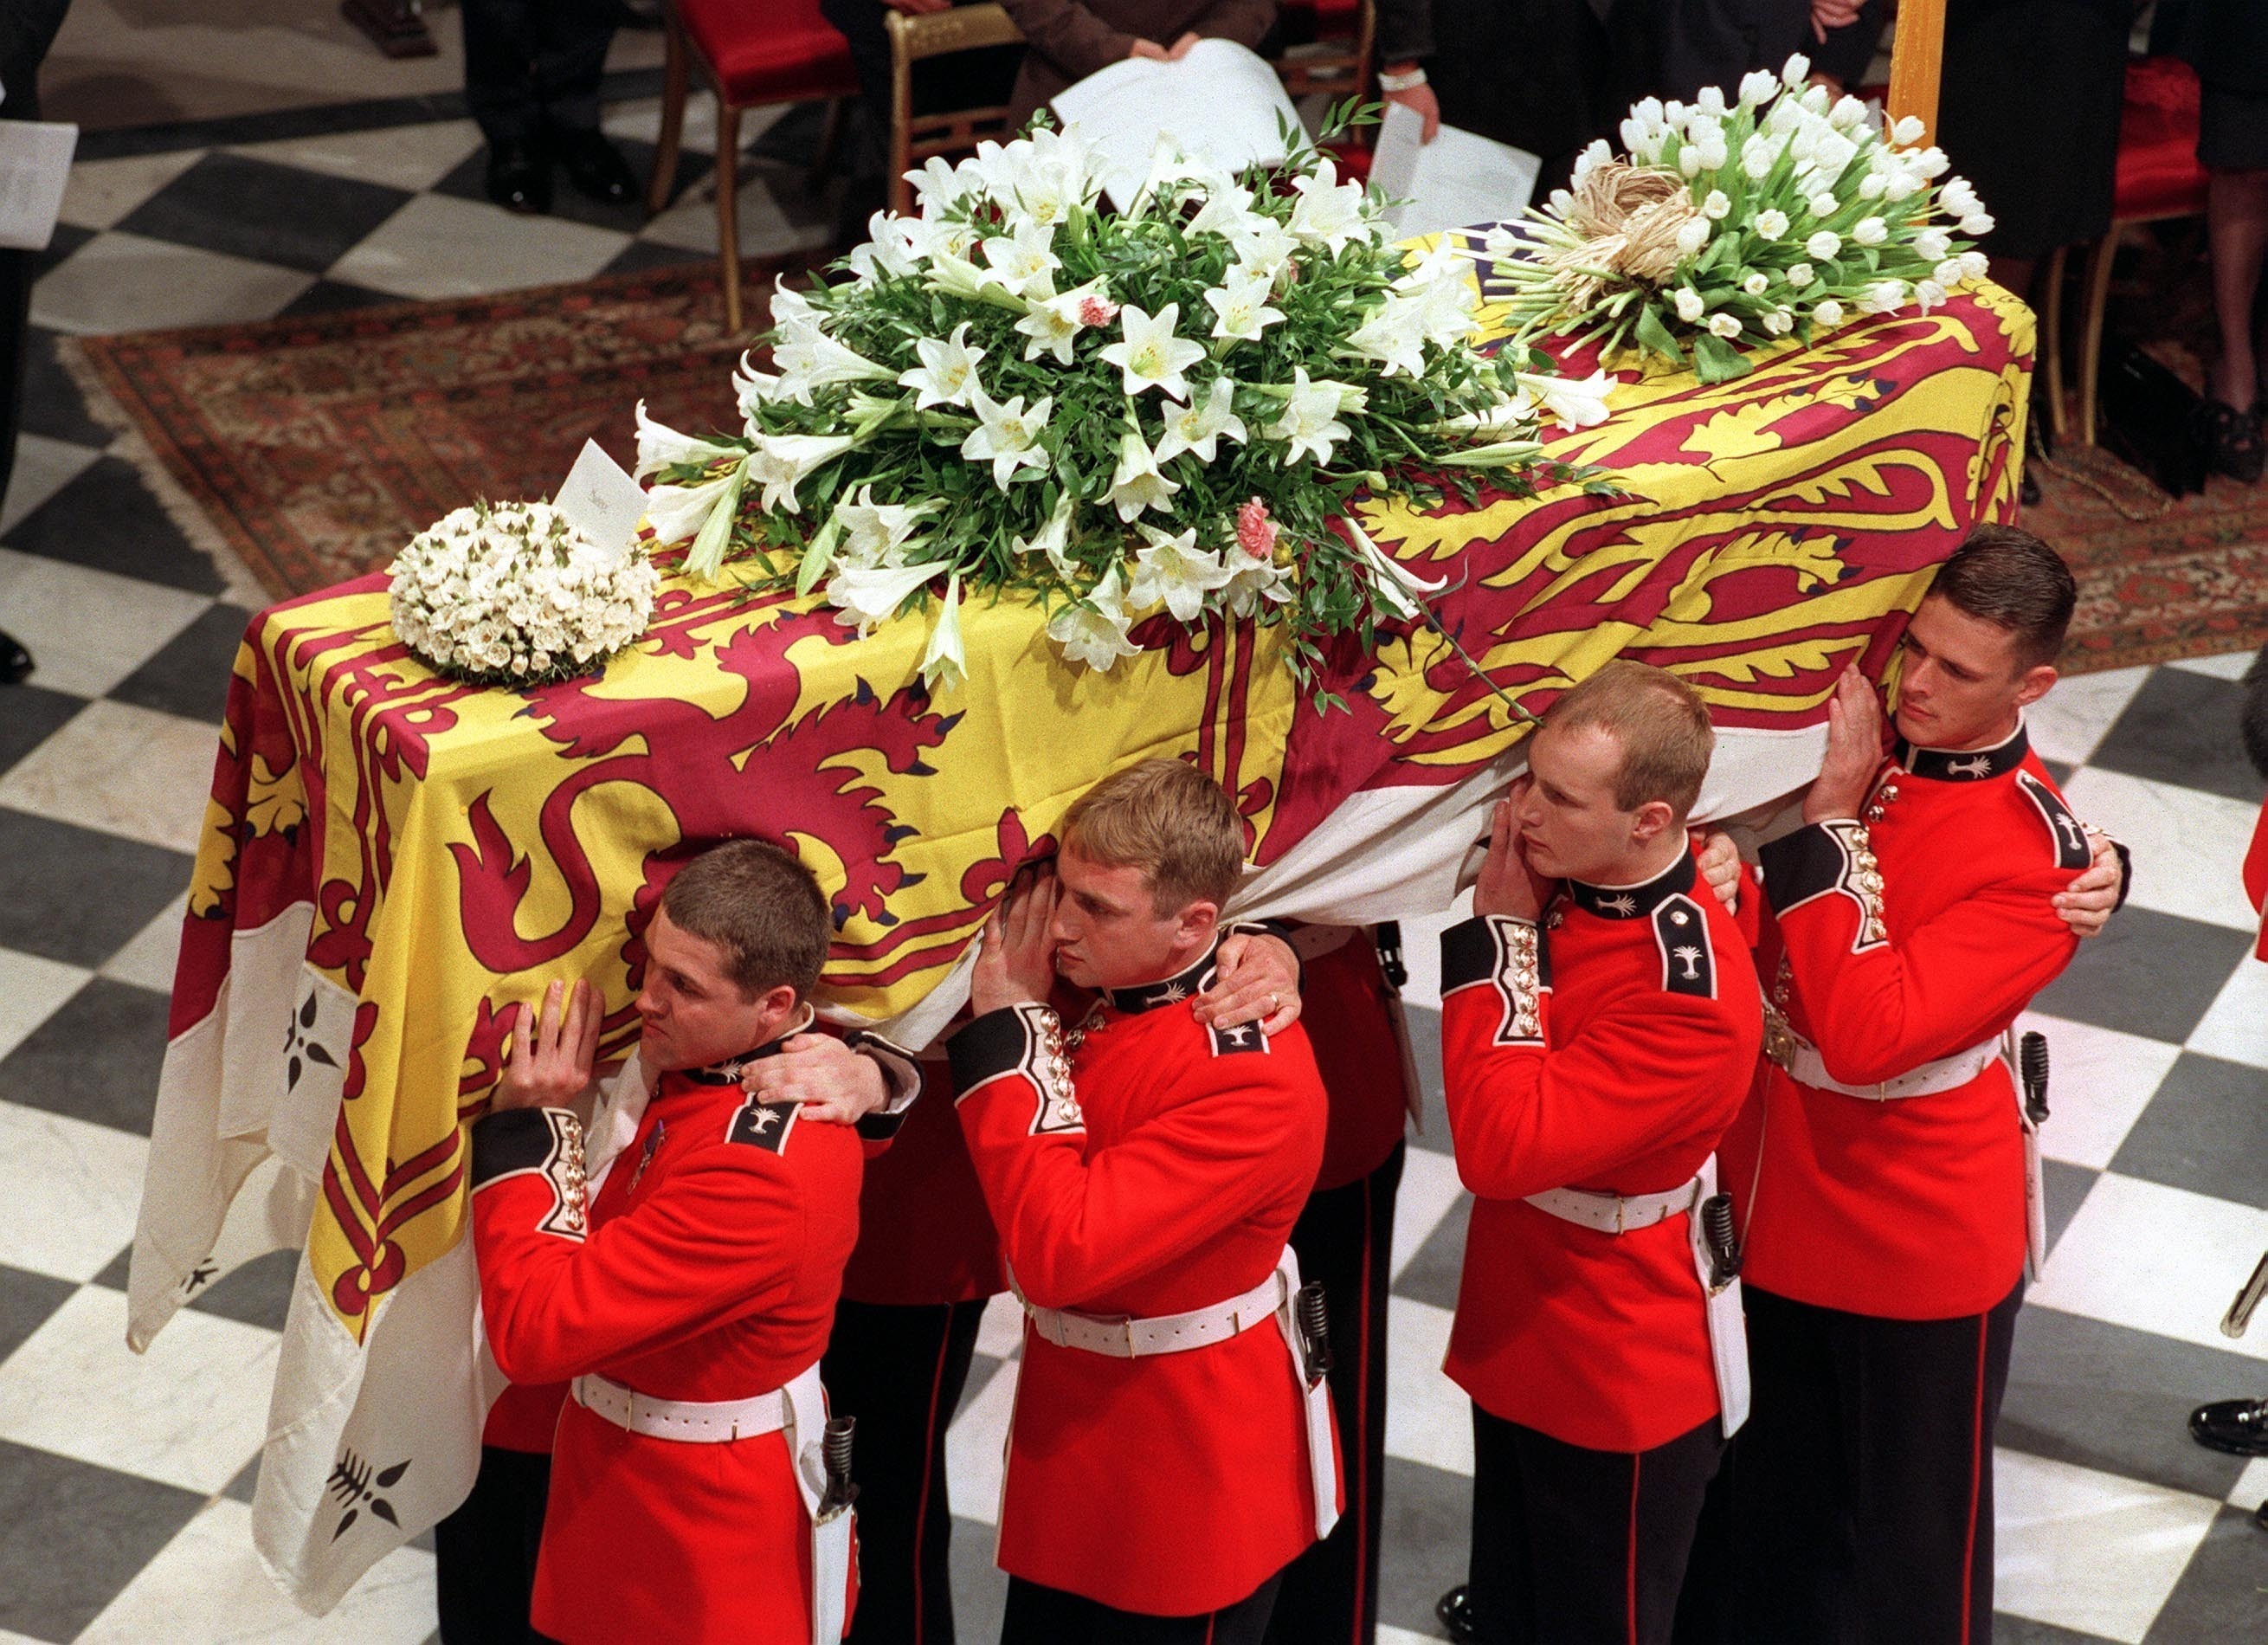 Some 31 million people in the UK tuned in for the funeral, which took place exactly 20 years ago today on September 6 1997. (John Stillwell/PA Wire)